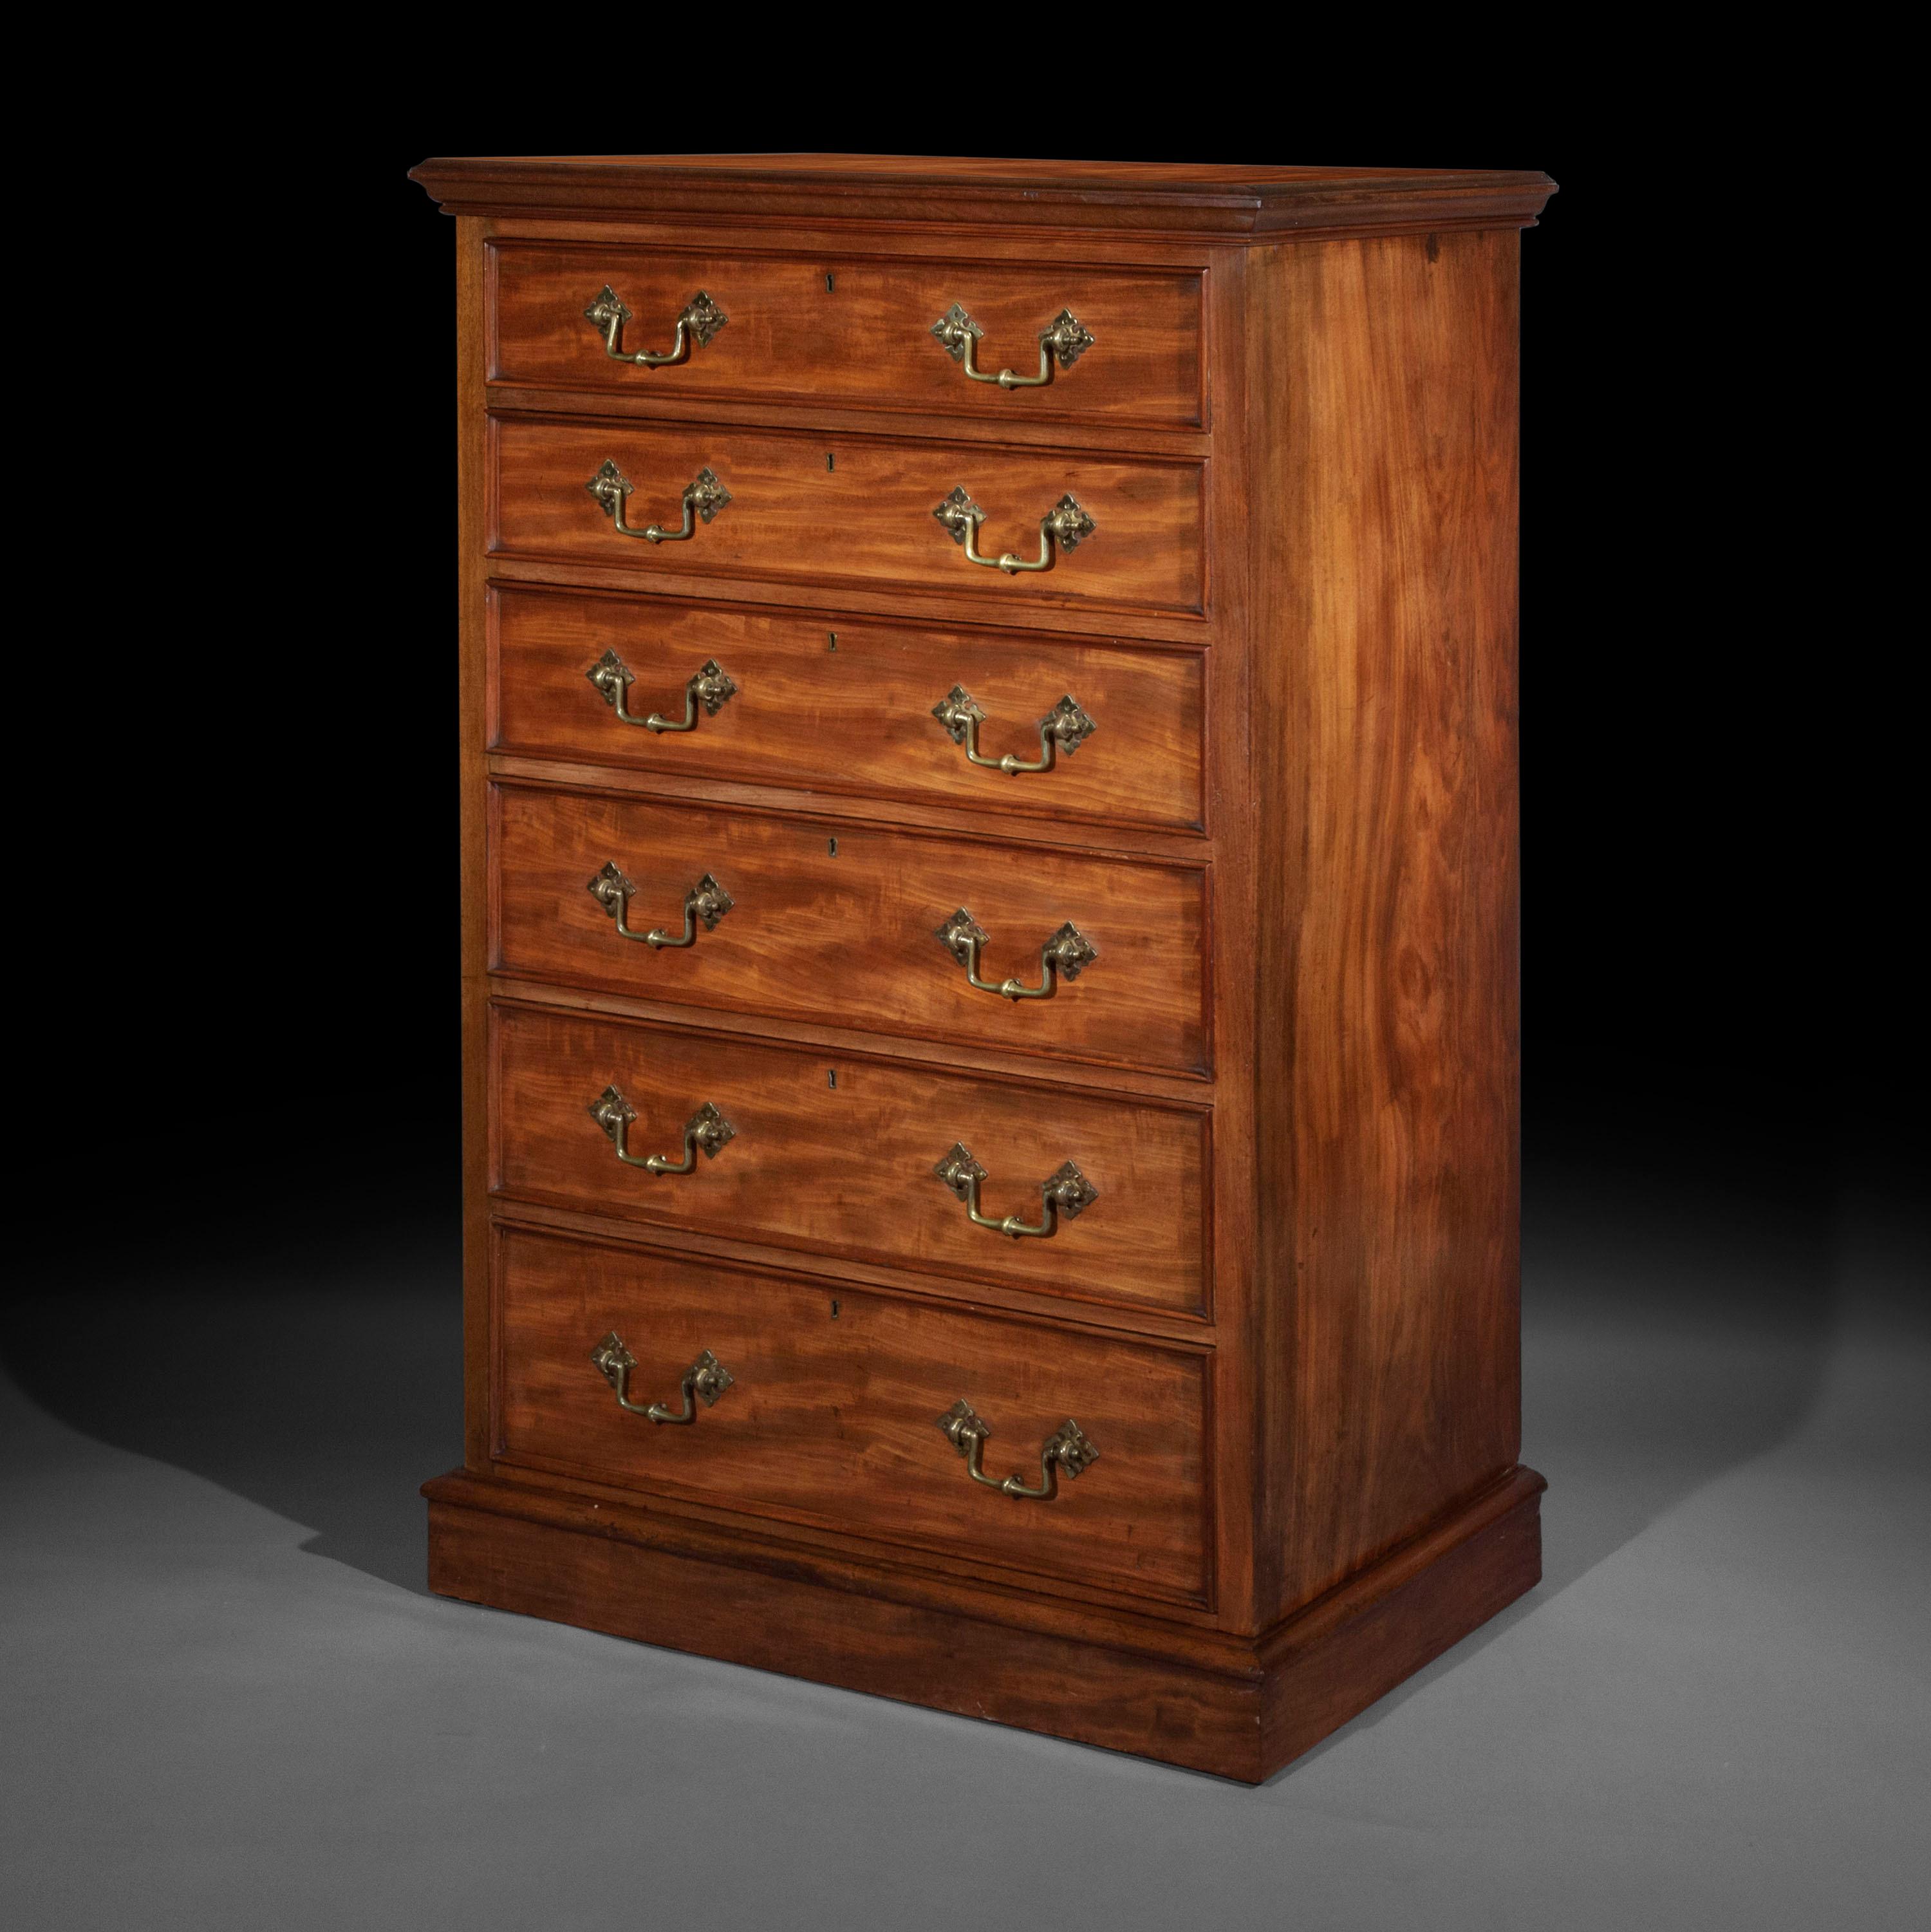 A post-Regency superb quality solid mahogany tall chest of six drawers, of the style and quality of the celebrated firm of Gillows of Lancaster and London.
English, circa 1835-1845

Why we like it
The combination of this remarkably well drawn,